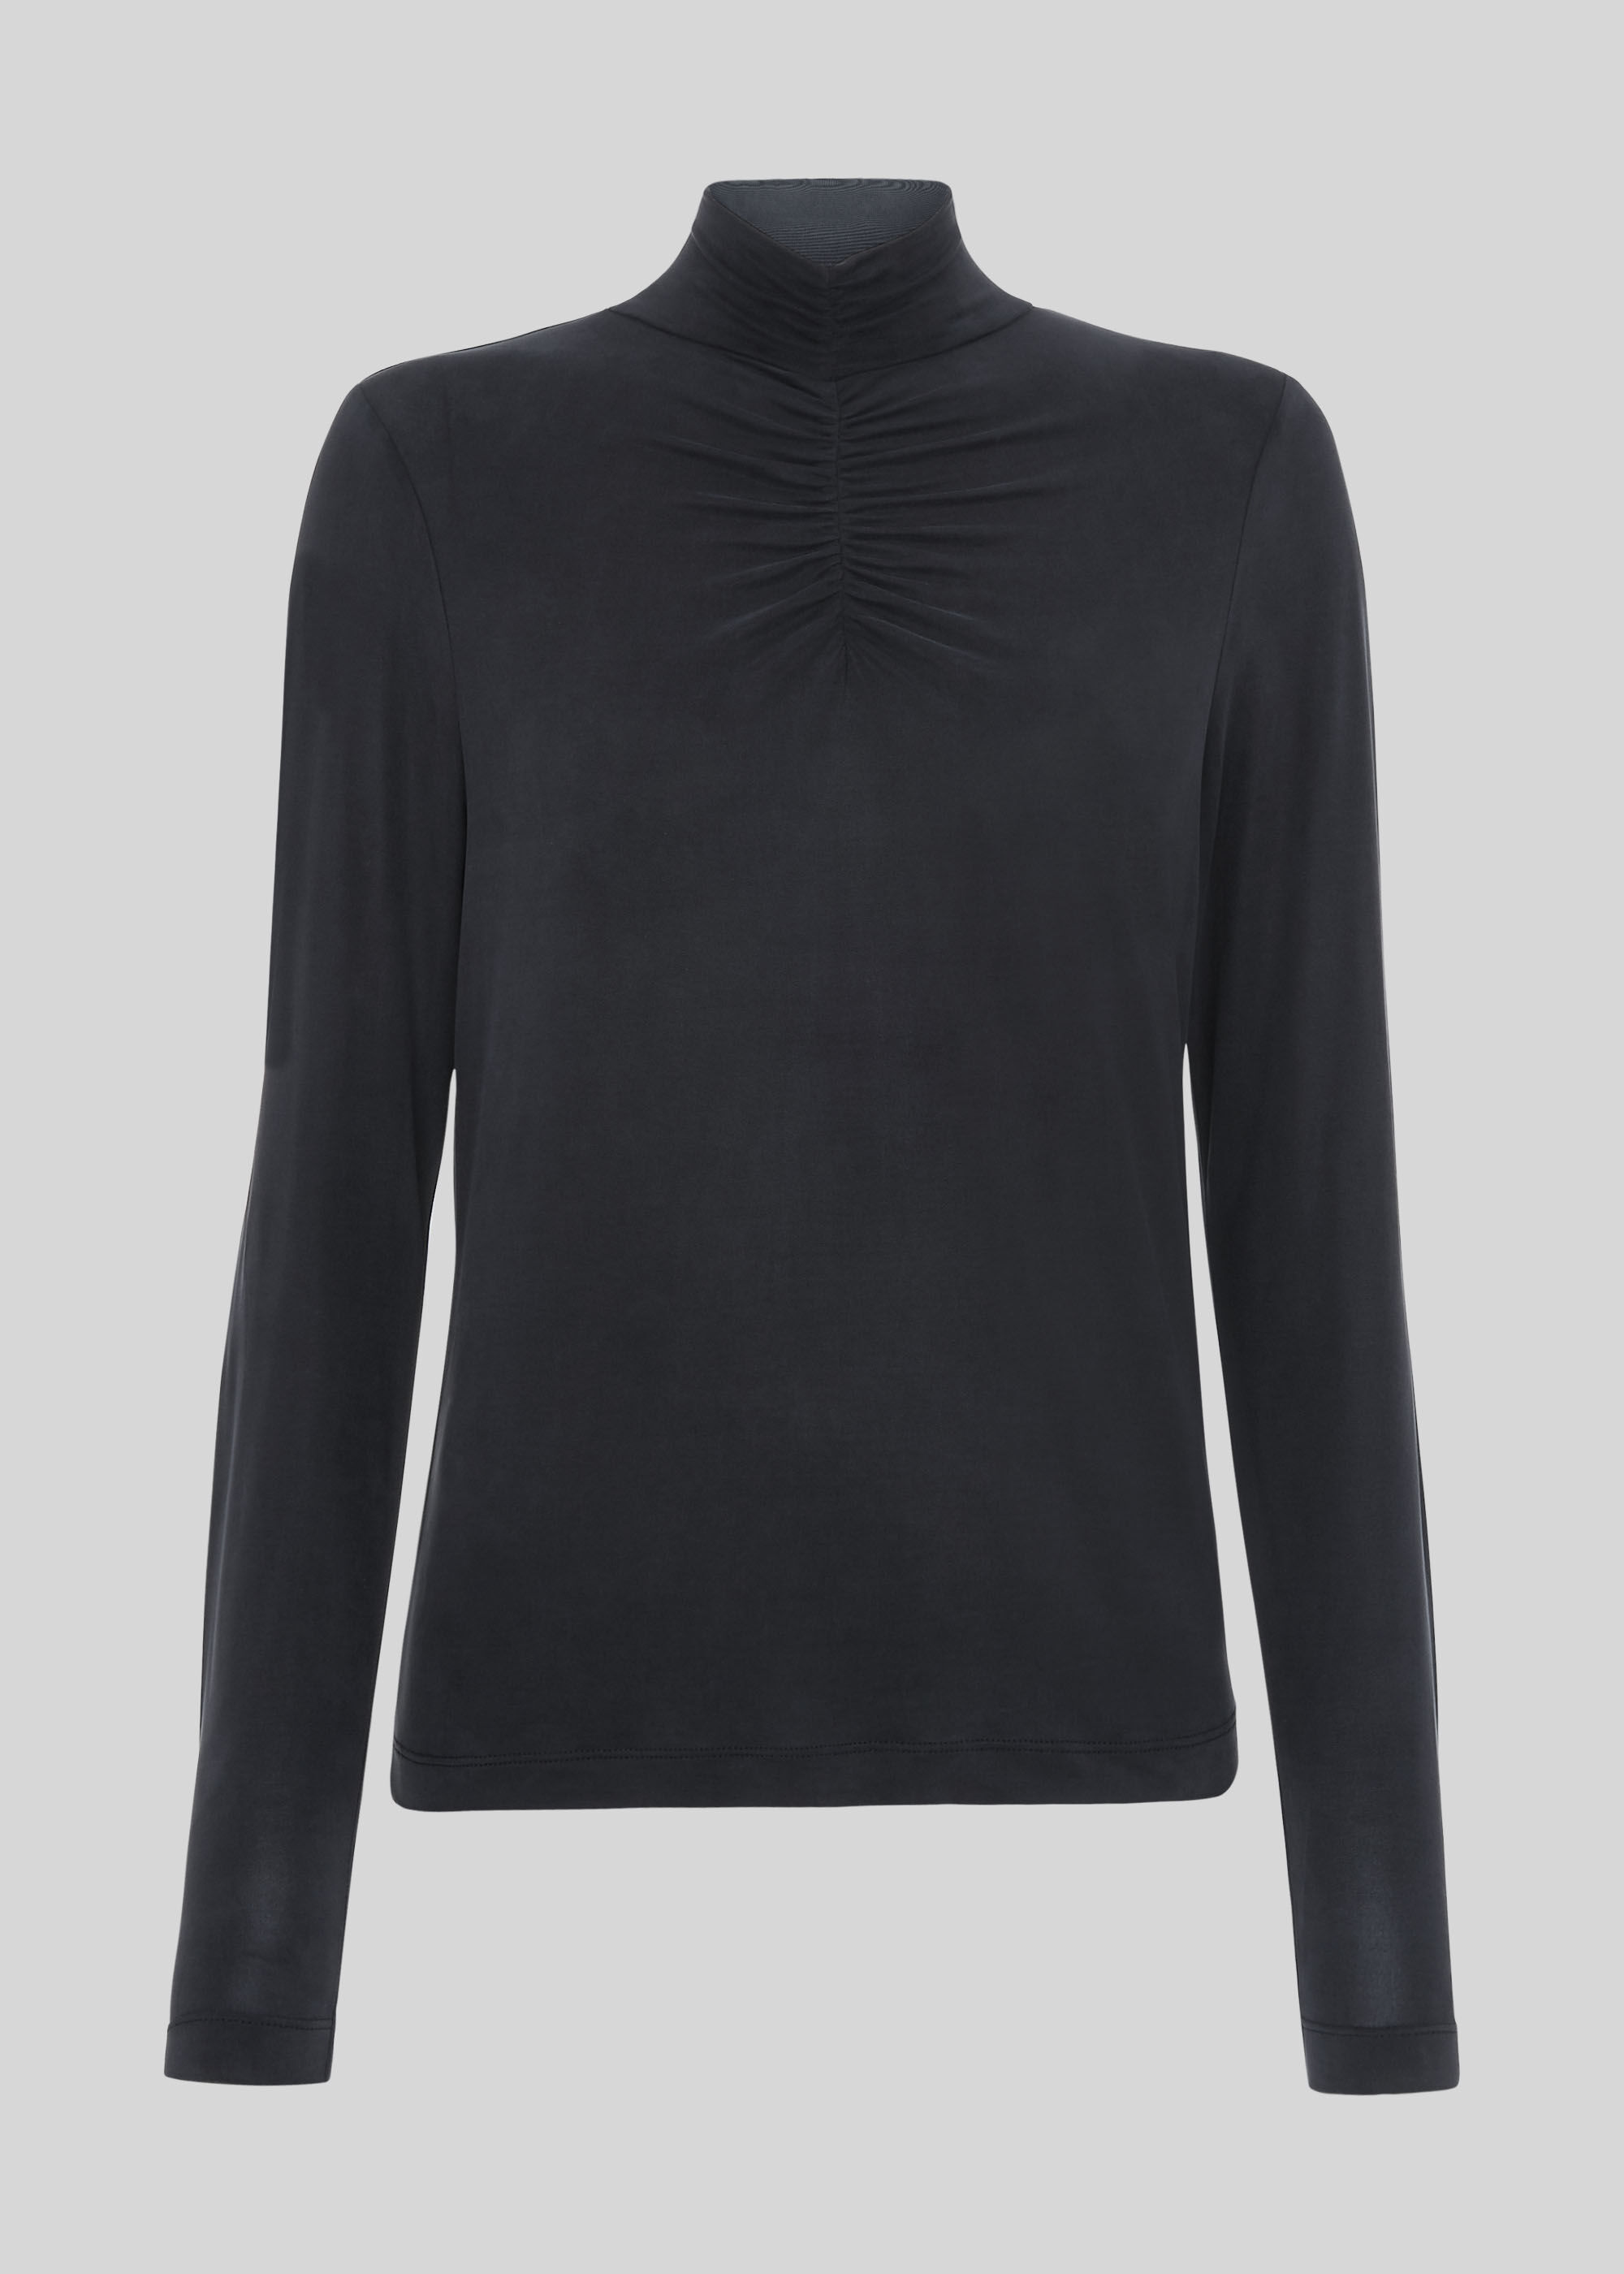 Black High Neck Gathered Cupro Top | WHISTLES |